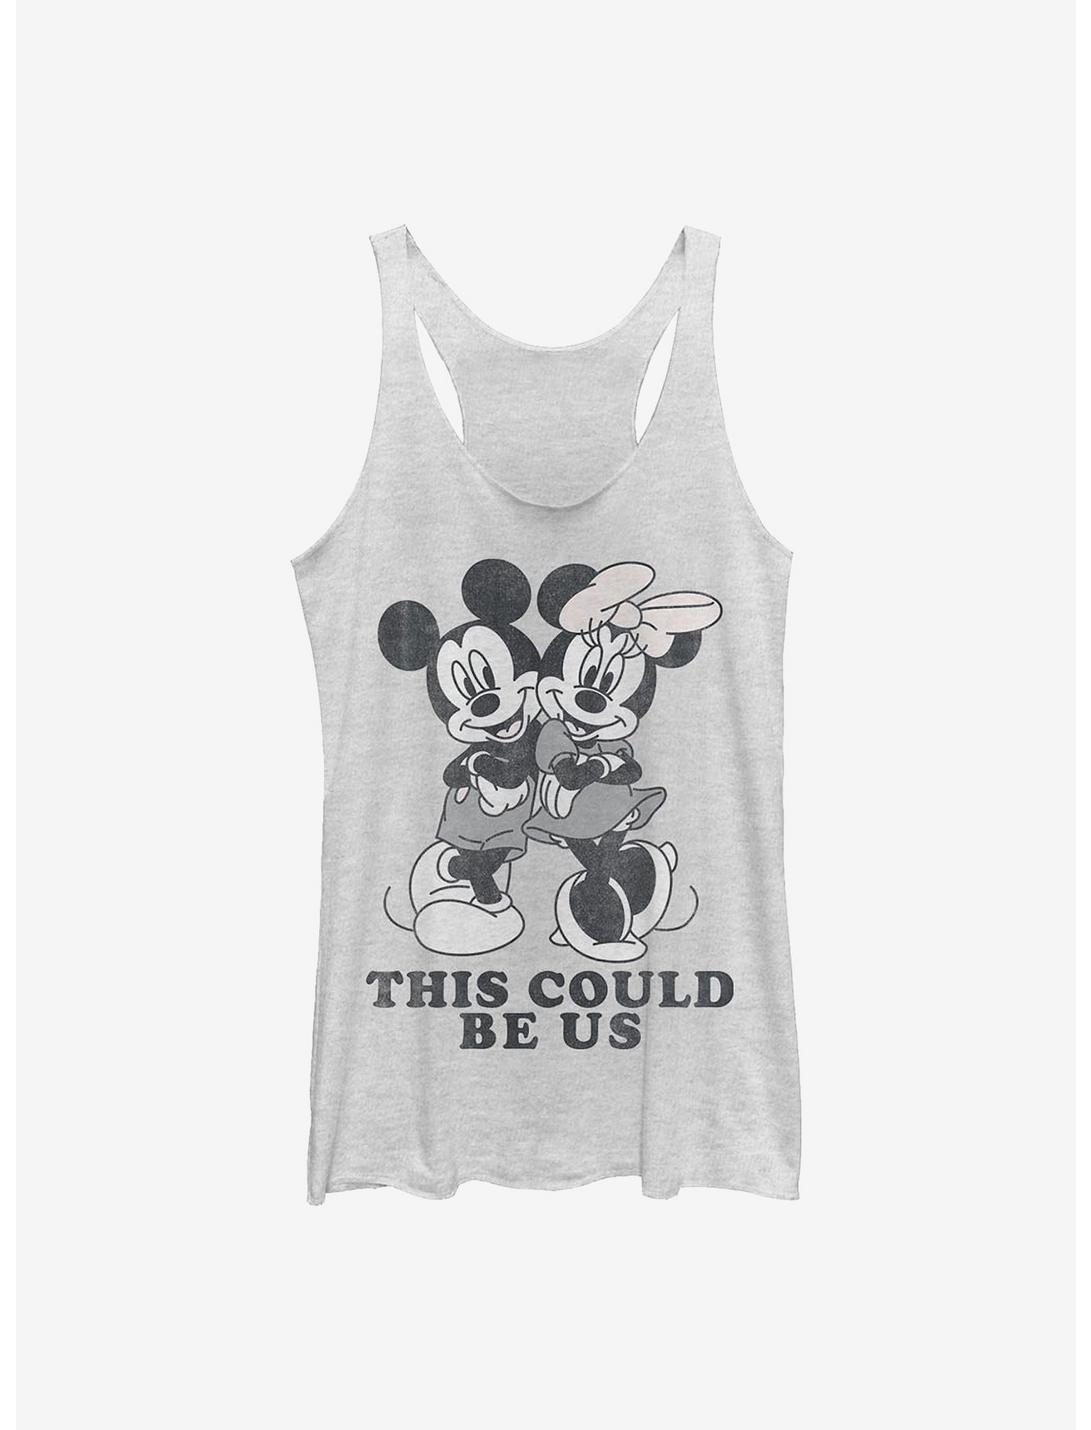 Disney Mickey Mouse Could Be Us Girls Tank, WHITE HTR, hi-res